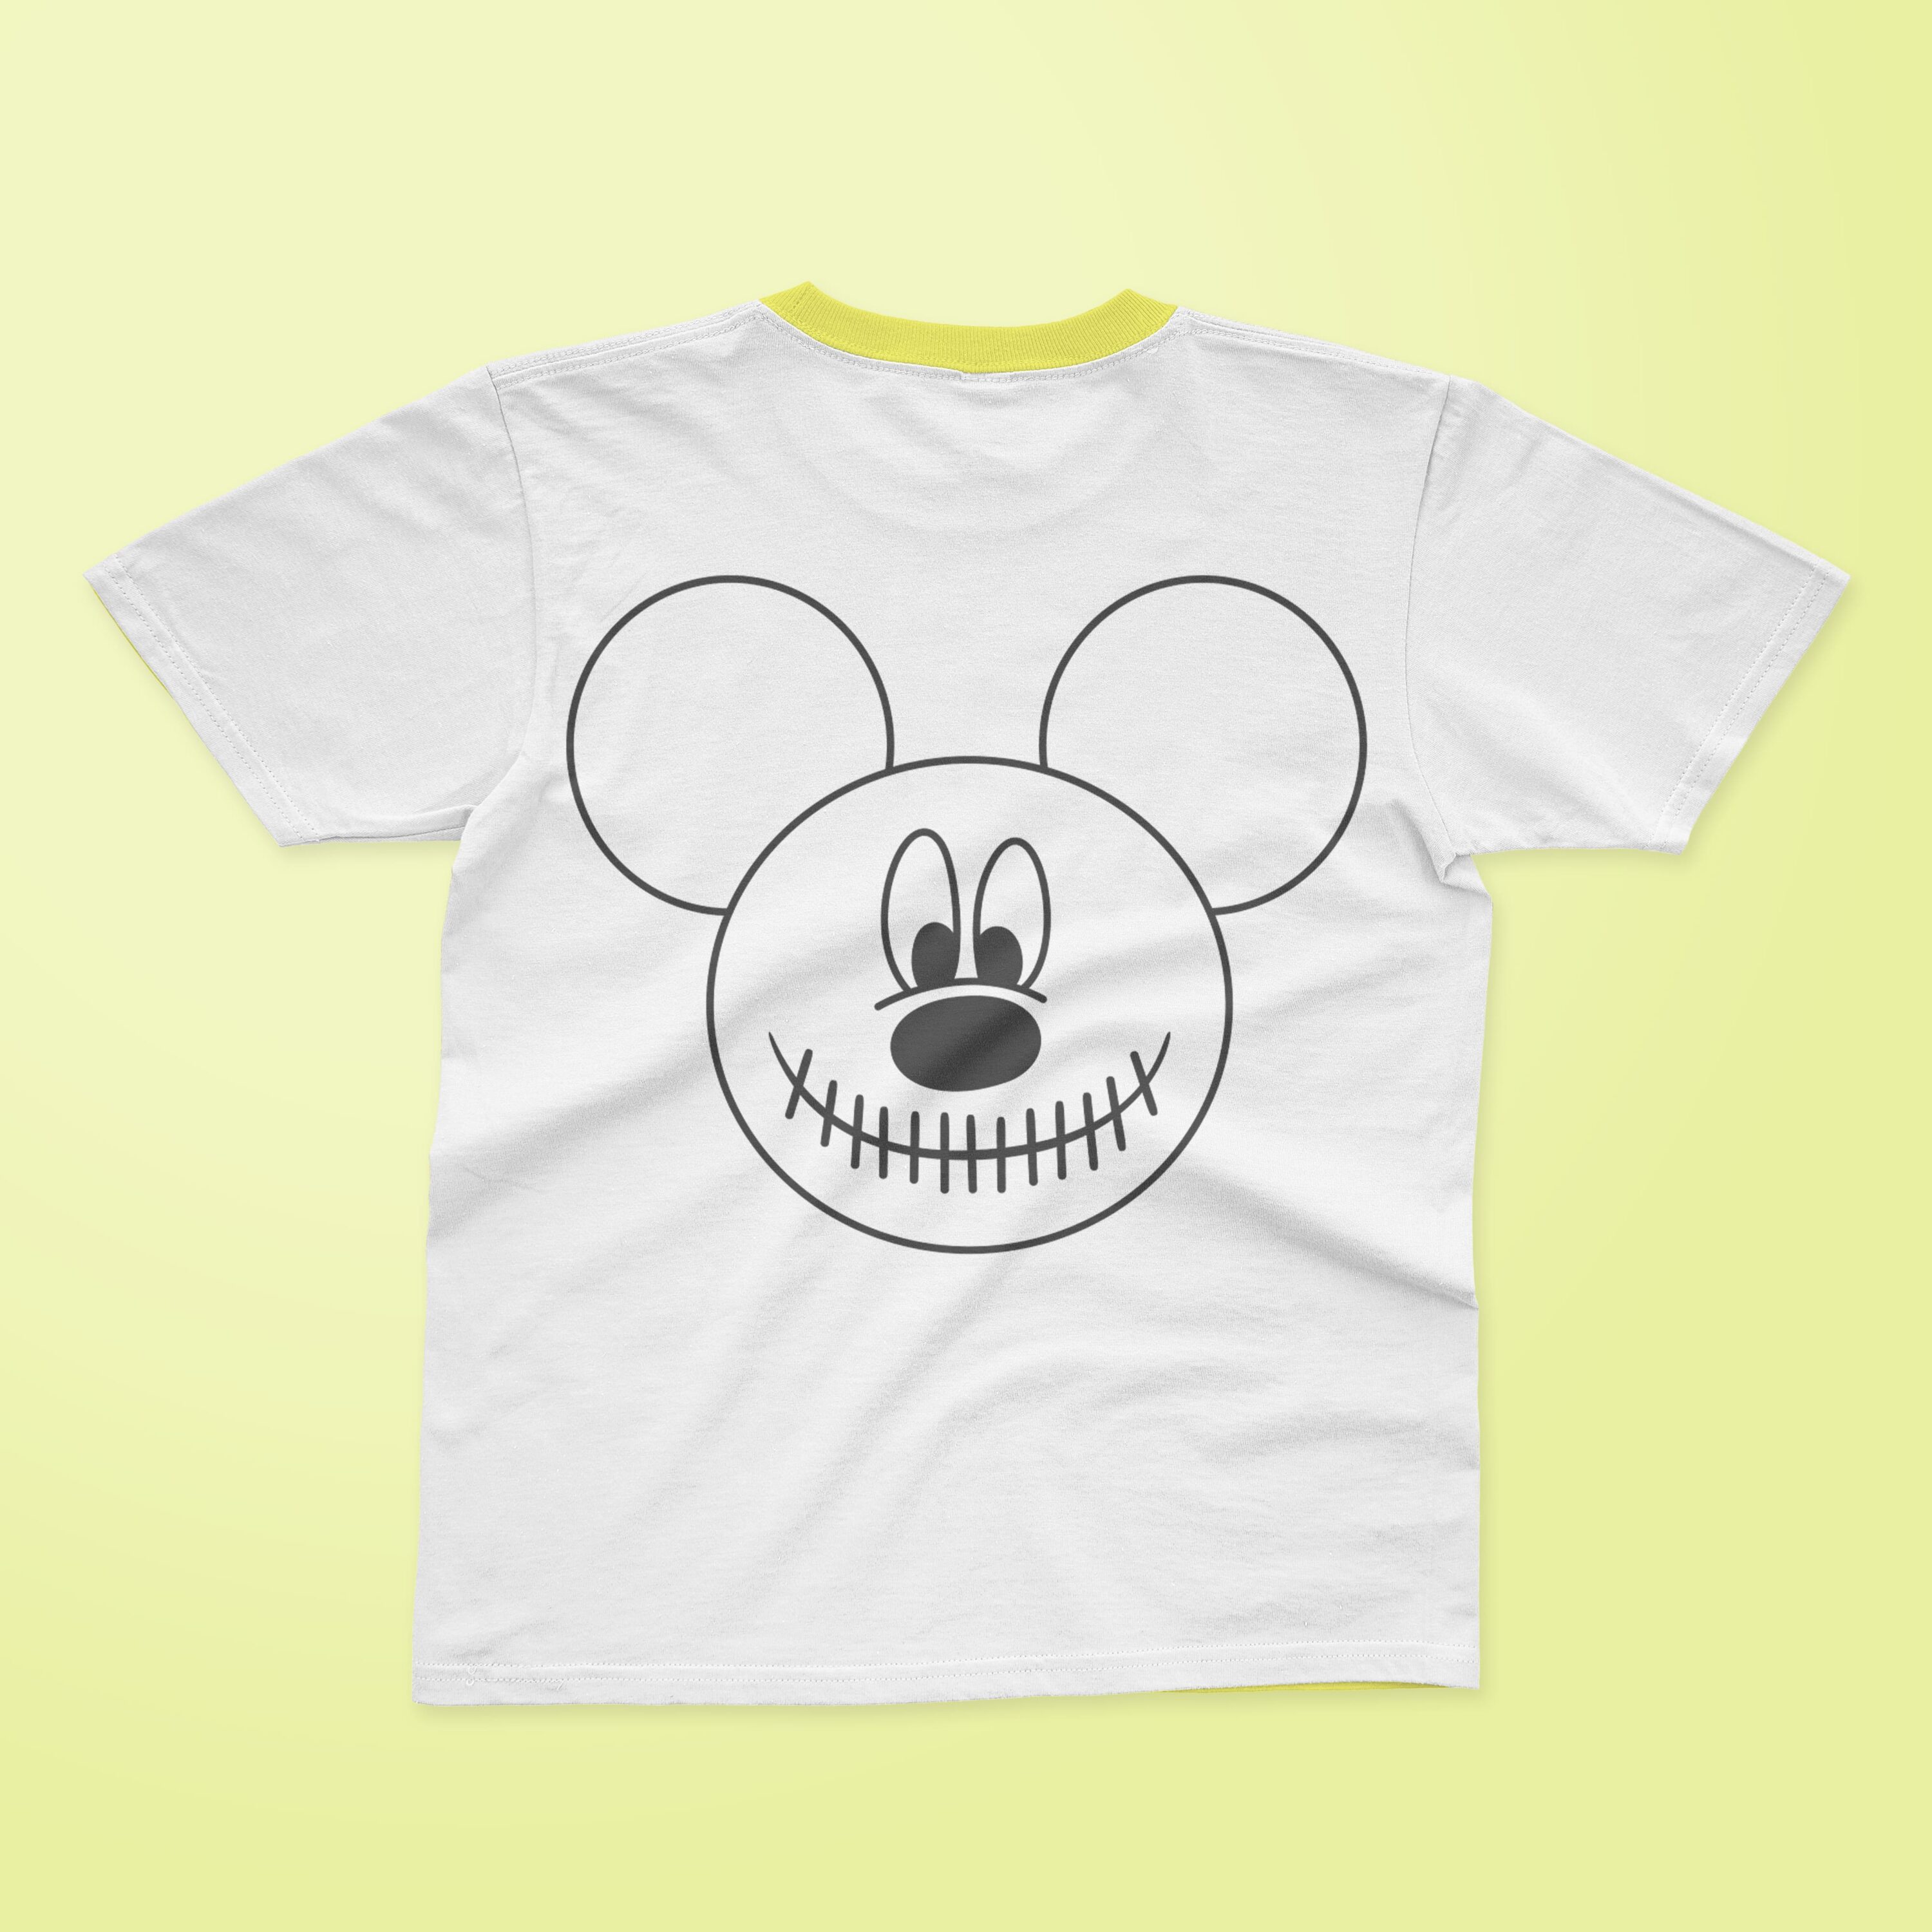 Thin line of Mickey Mouse face.